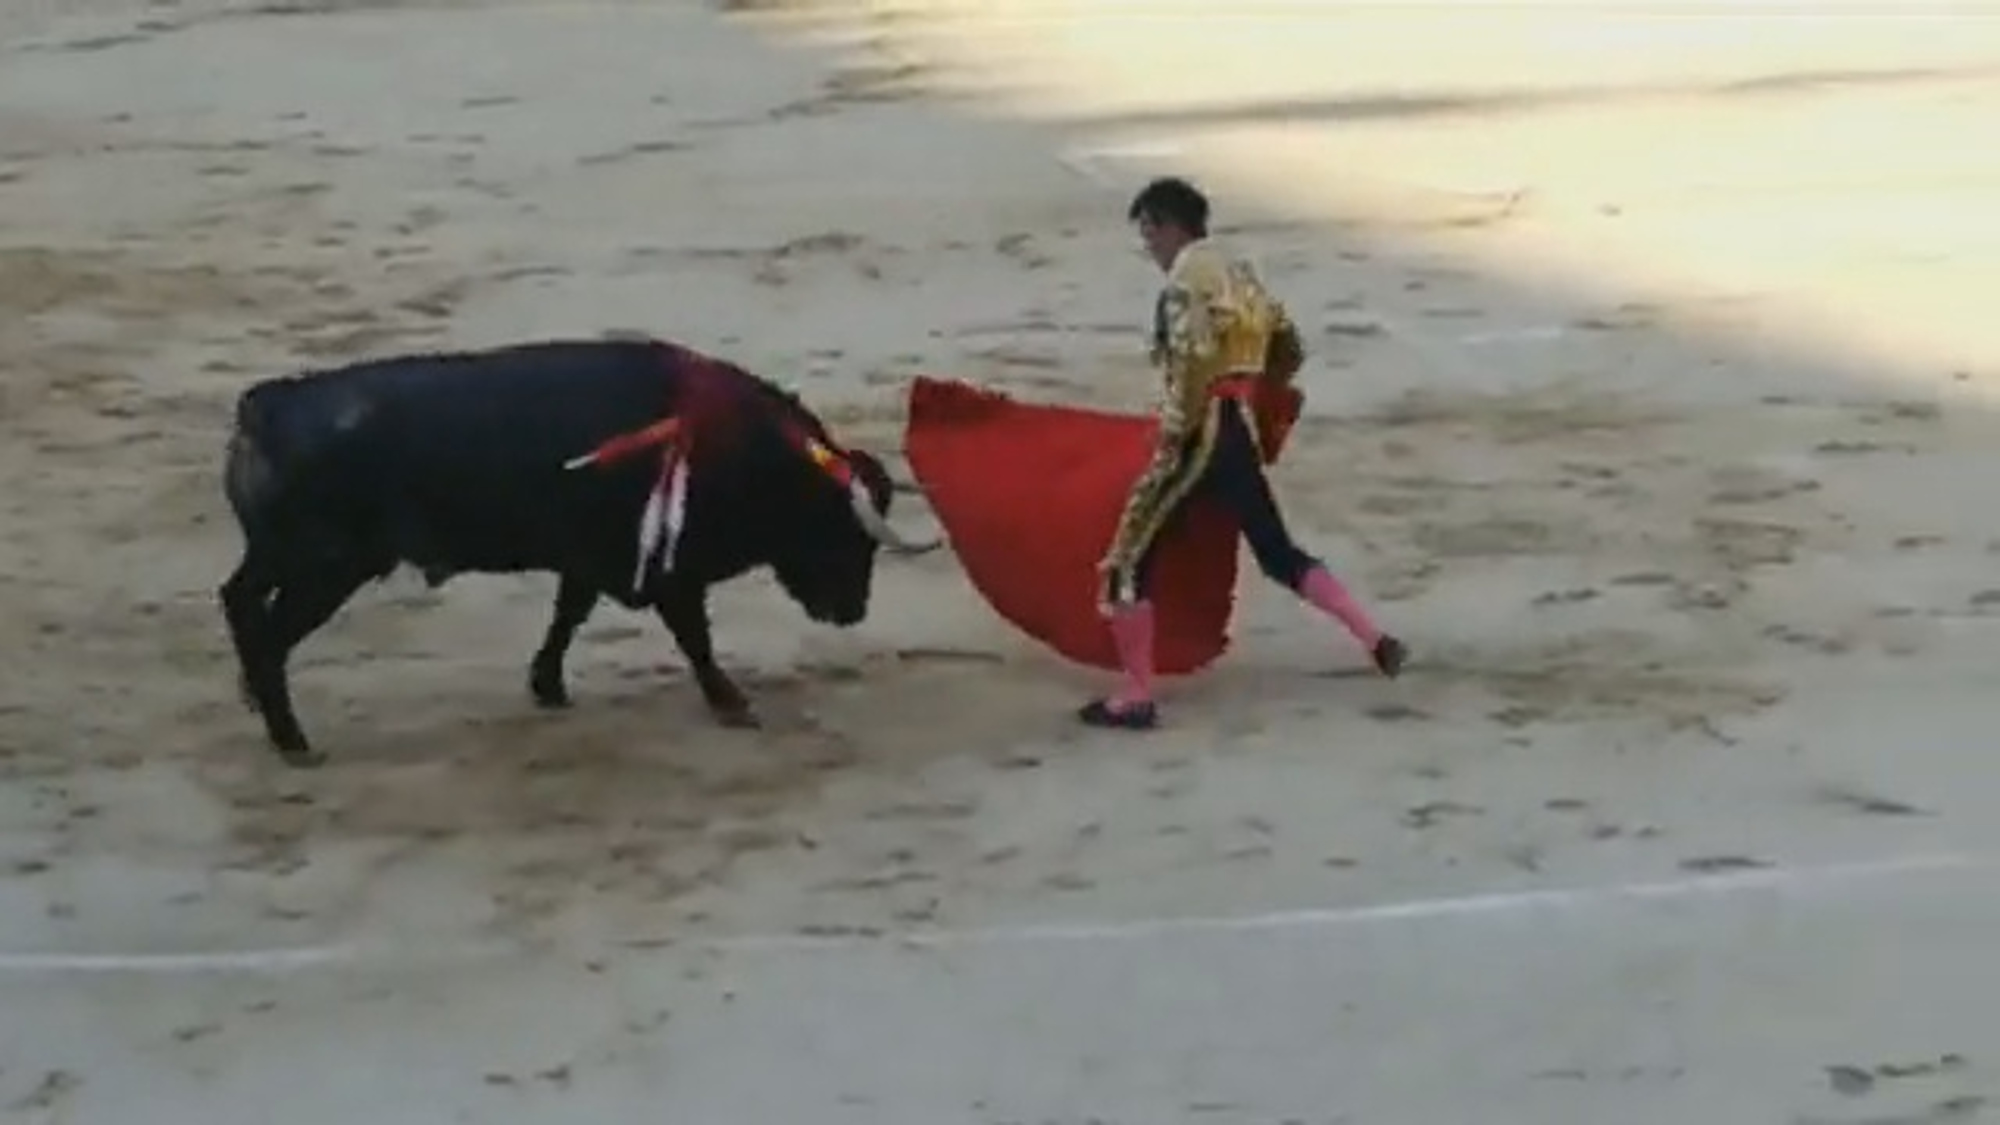 Read more about the article Matador Gored In Leg Receives 25cm Gash In Bullfight